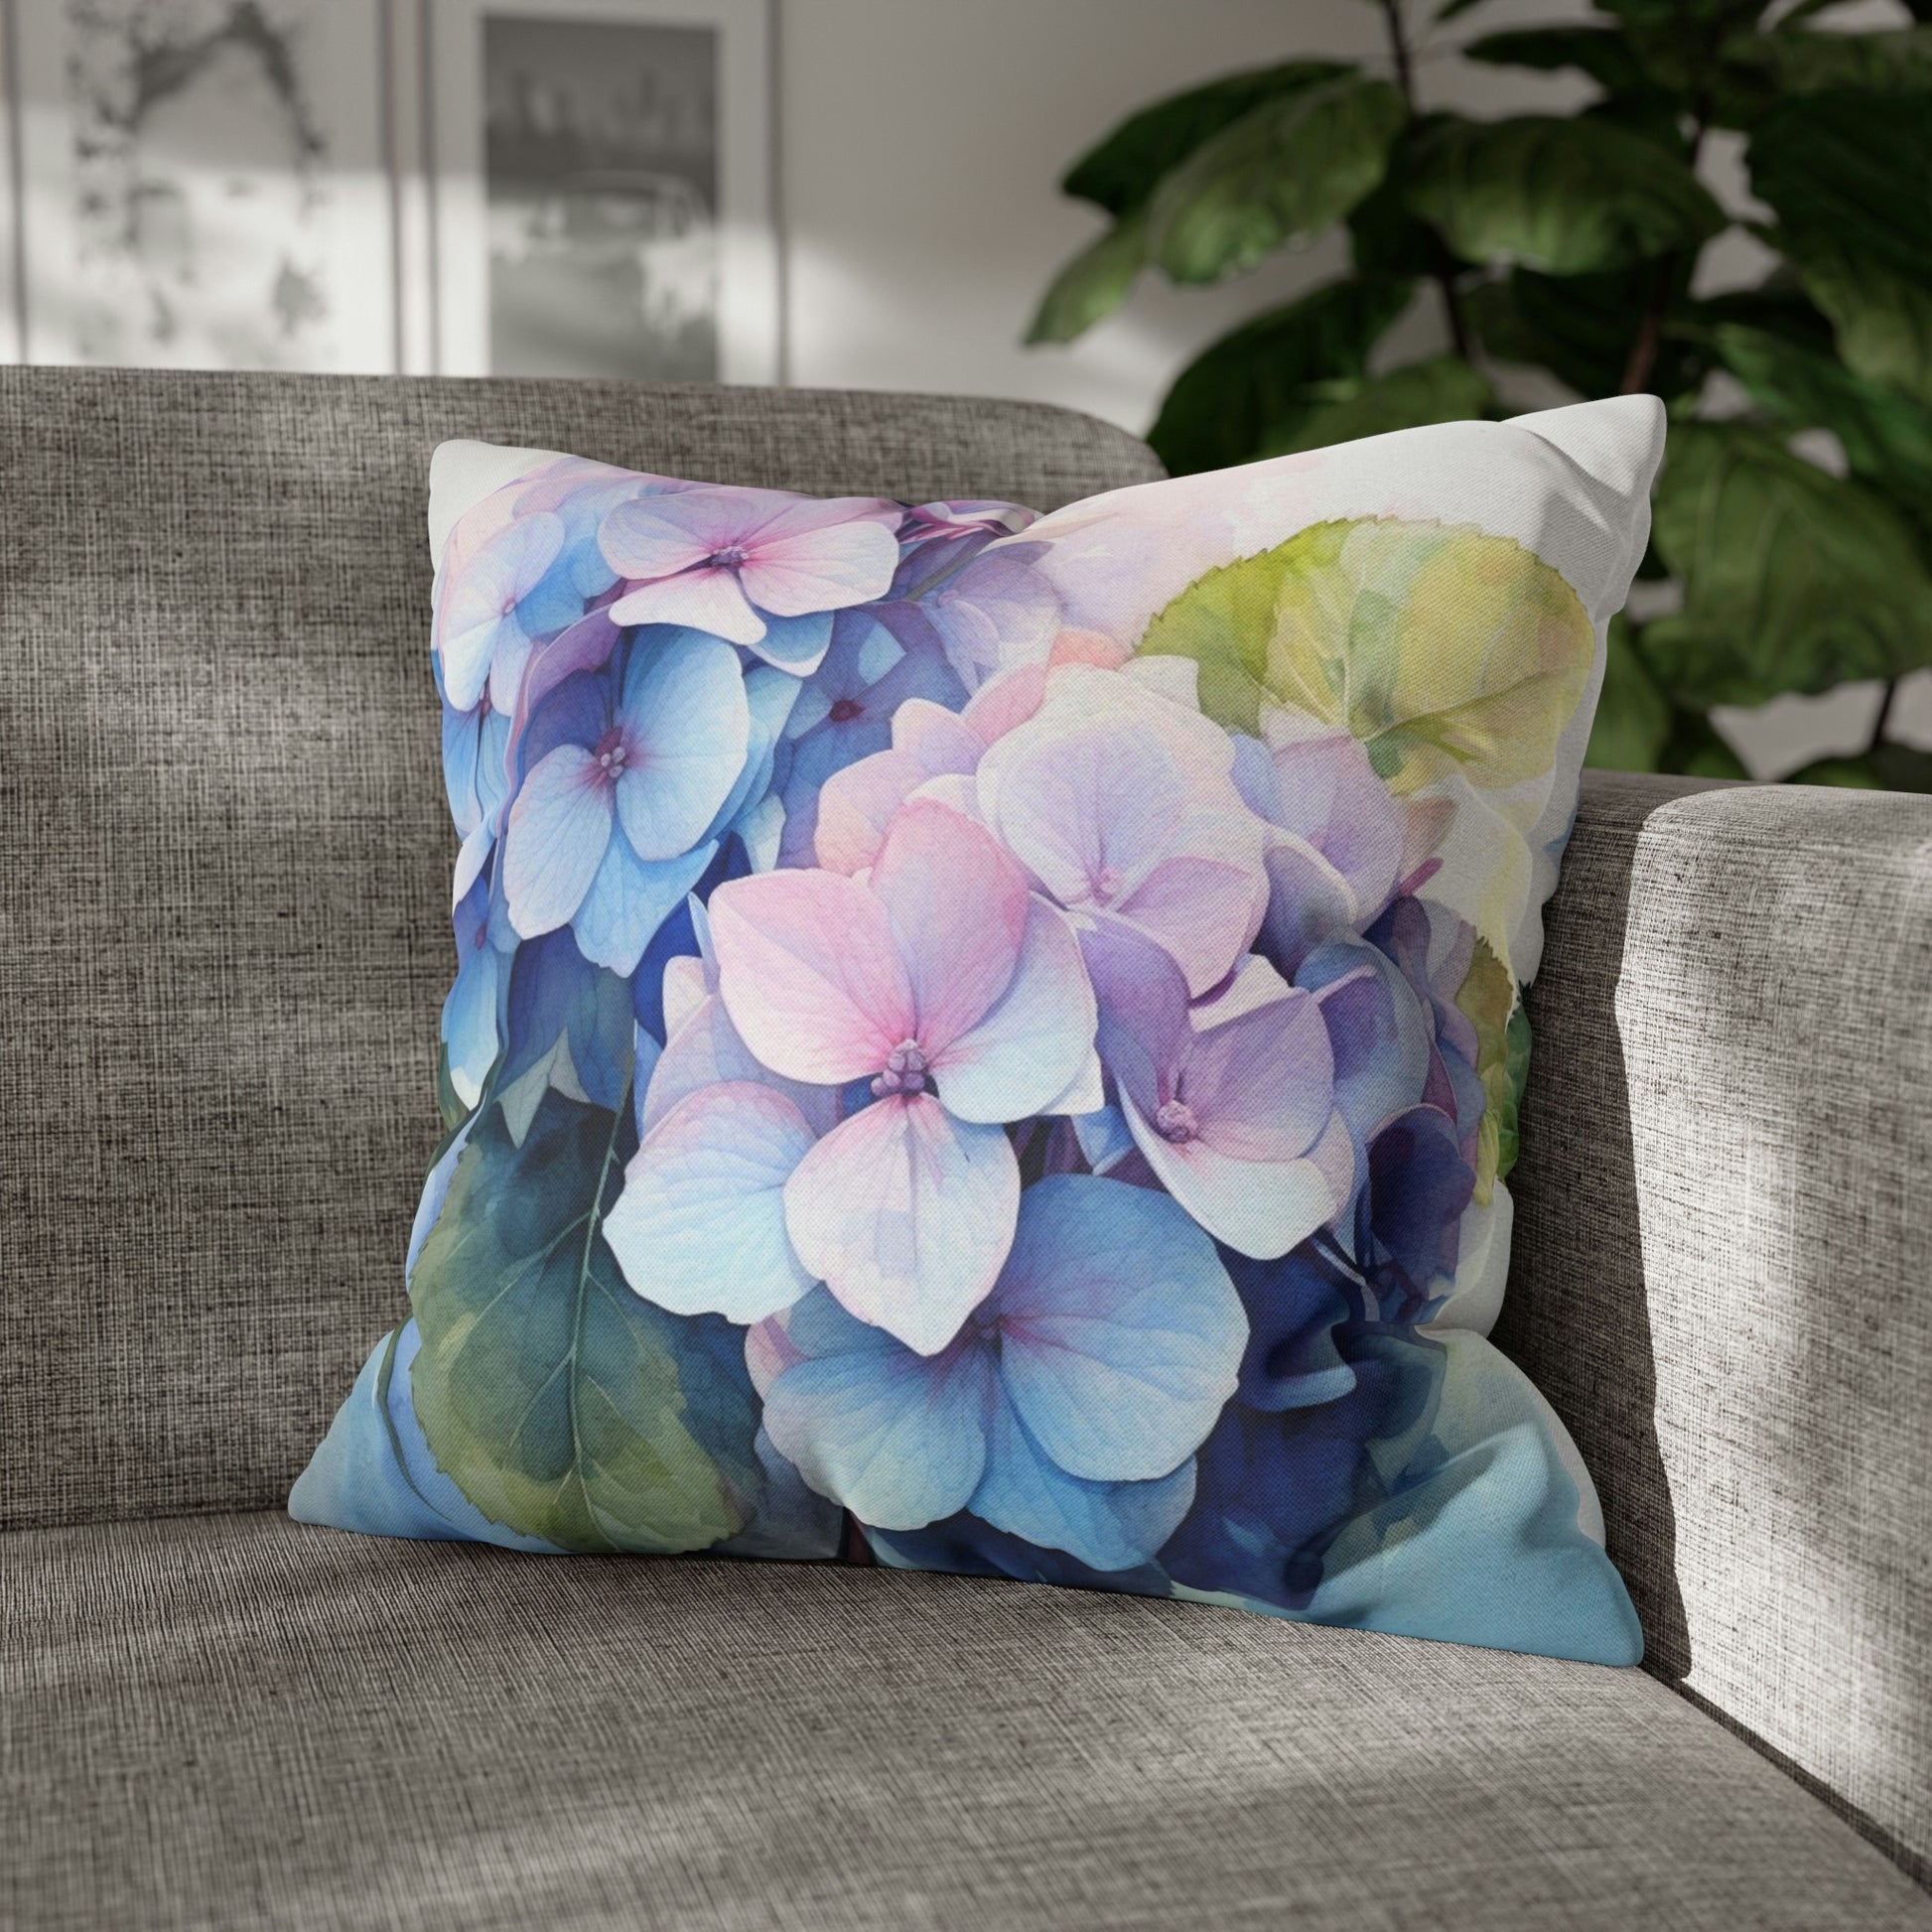 Hydrangea Flowers Pillow Case, Watercolor Floral Art Blue Pink Square Throw Decorative Cover Decor Couch Cushion 20 x 20 Zipper Sofa Starcove Fashion